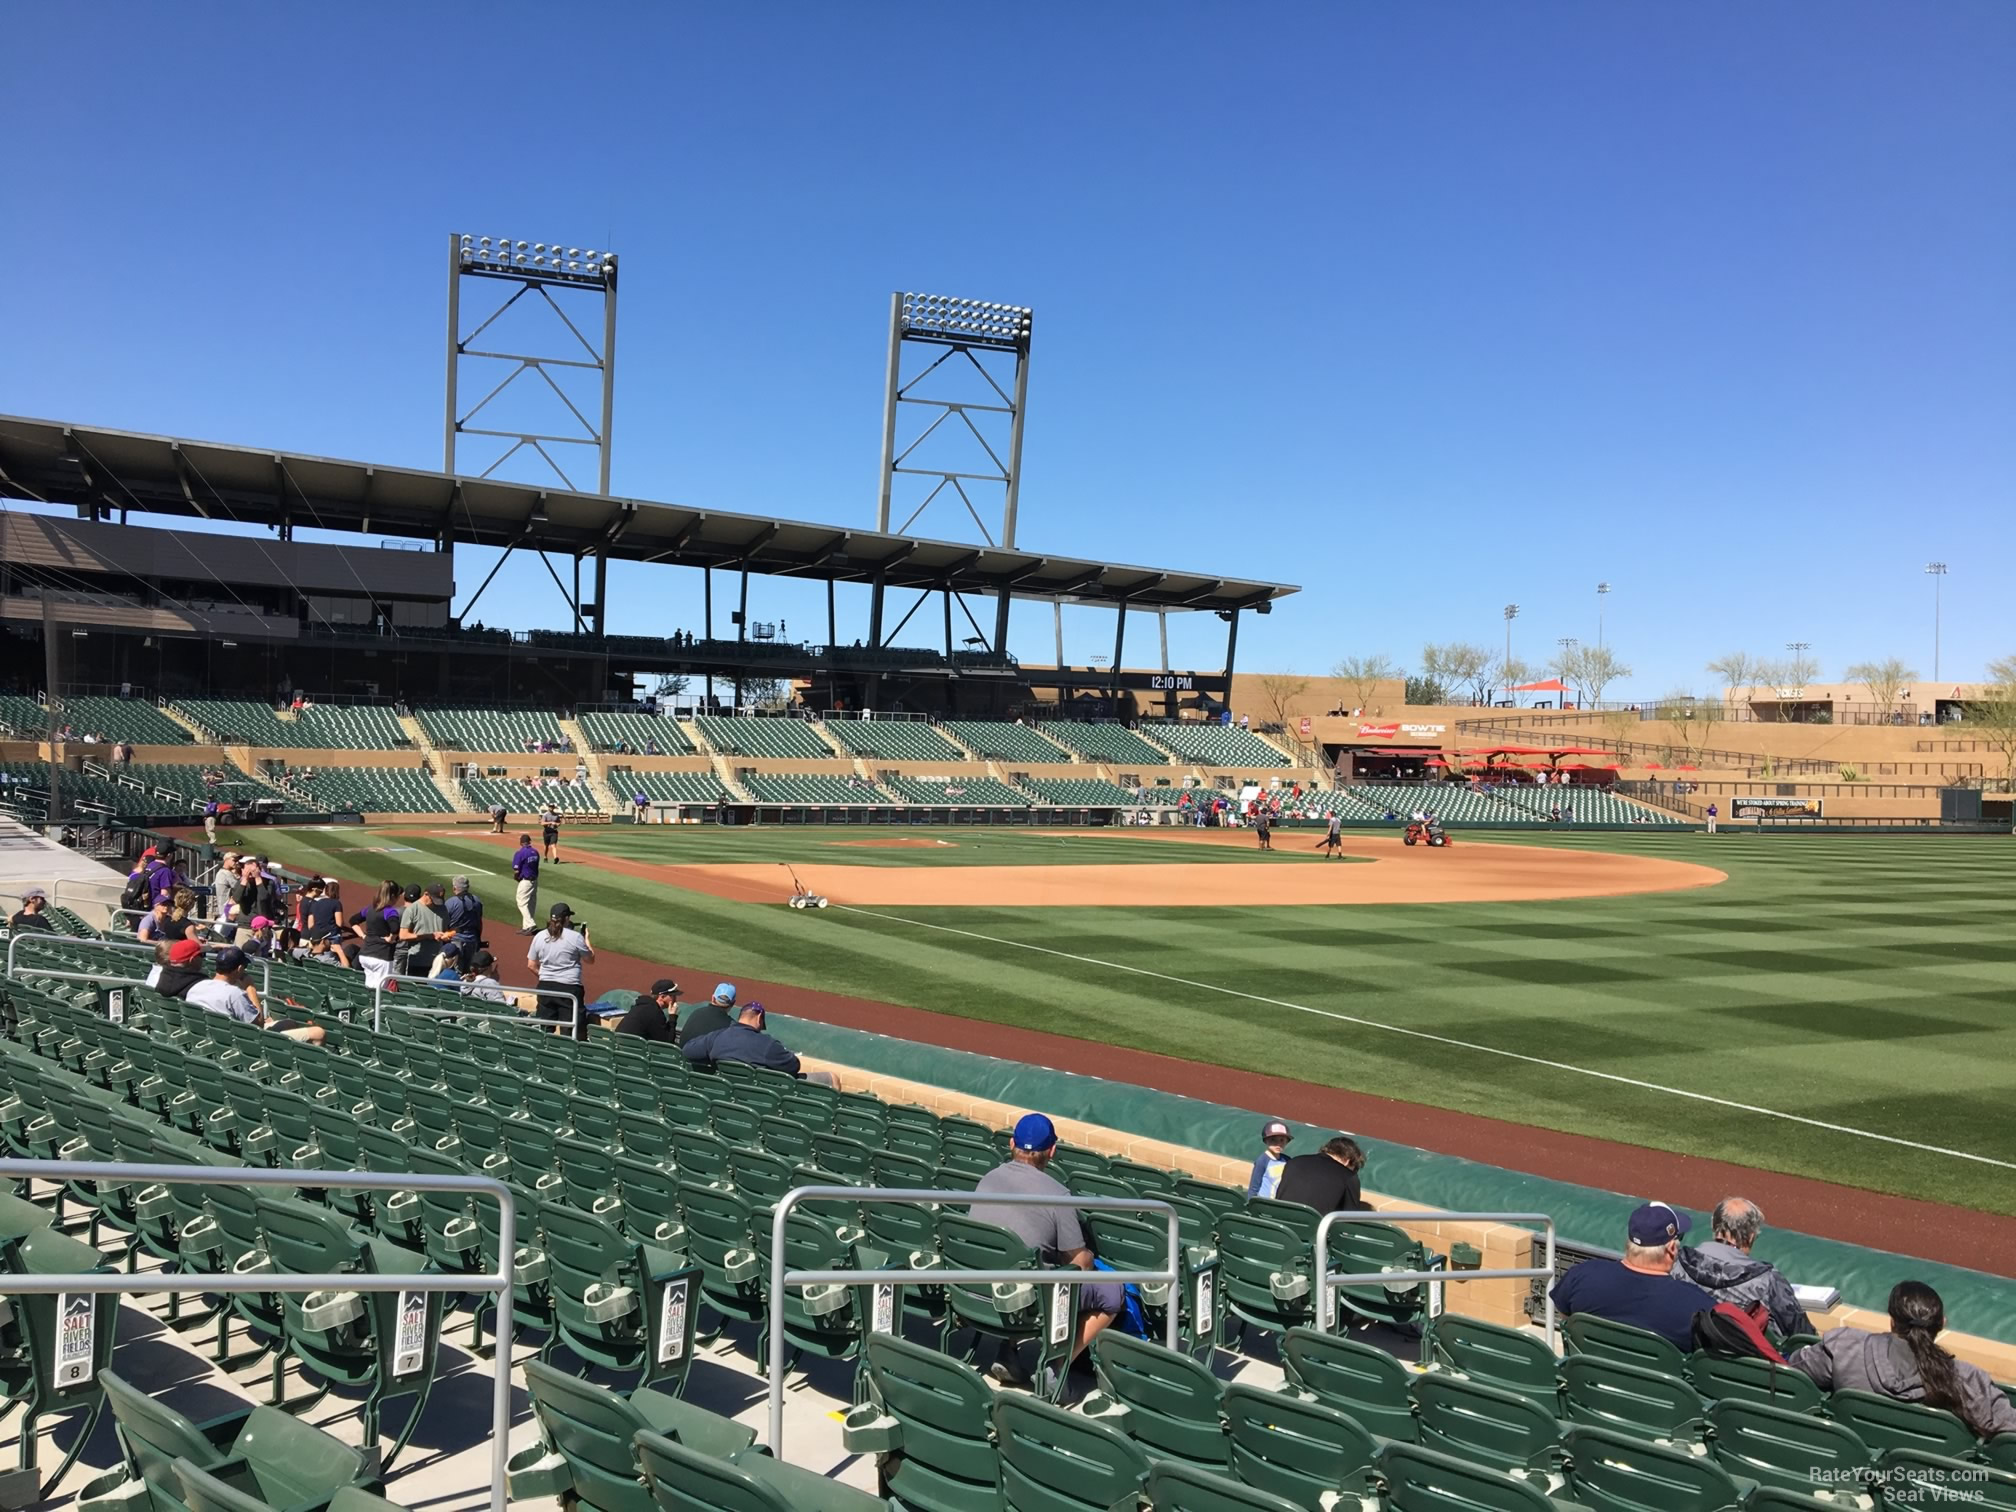 section 101, row 10 seat view  - salt river field at talking stick